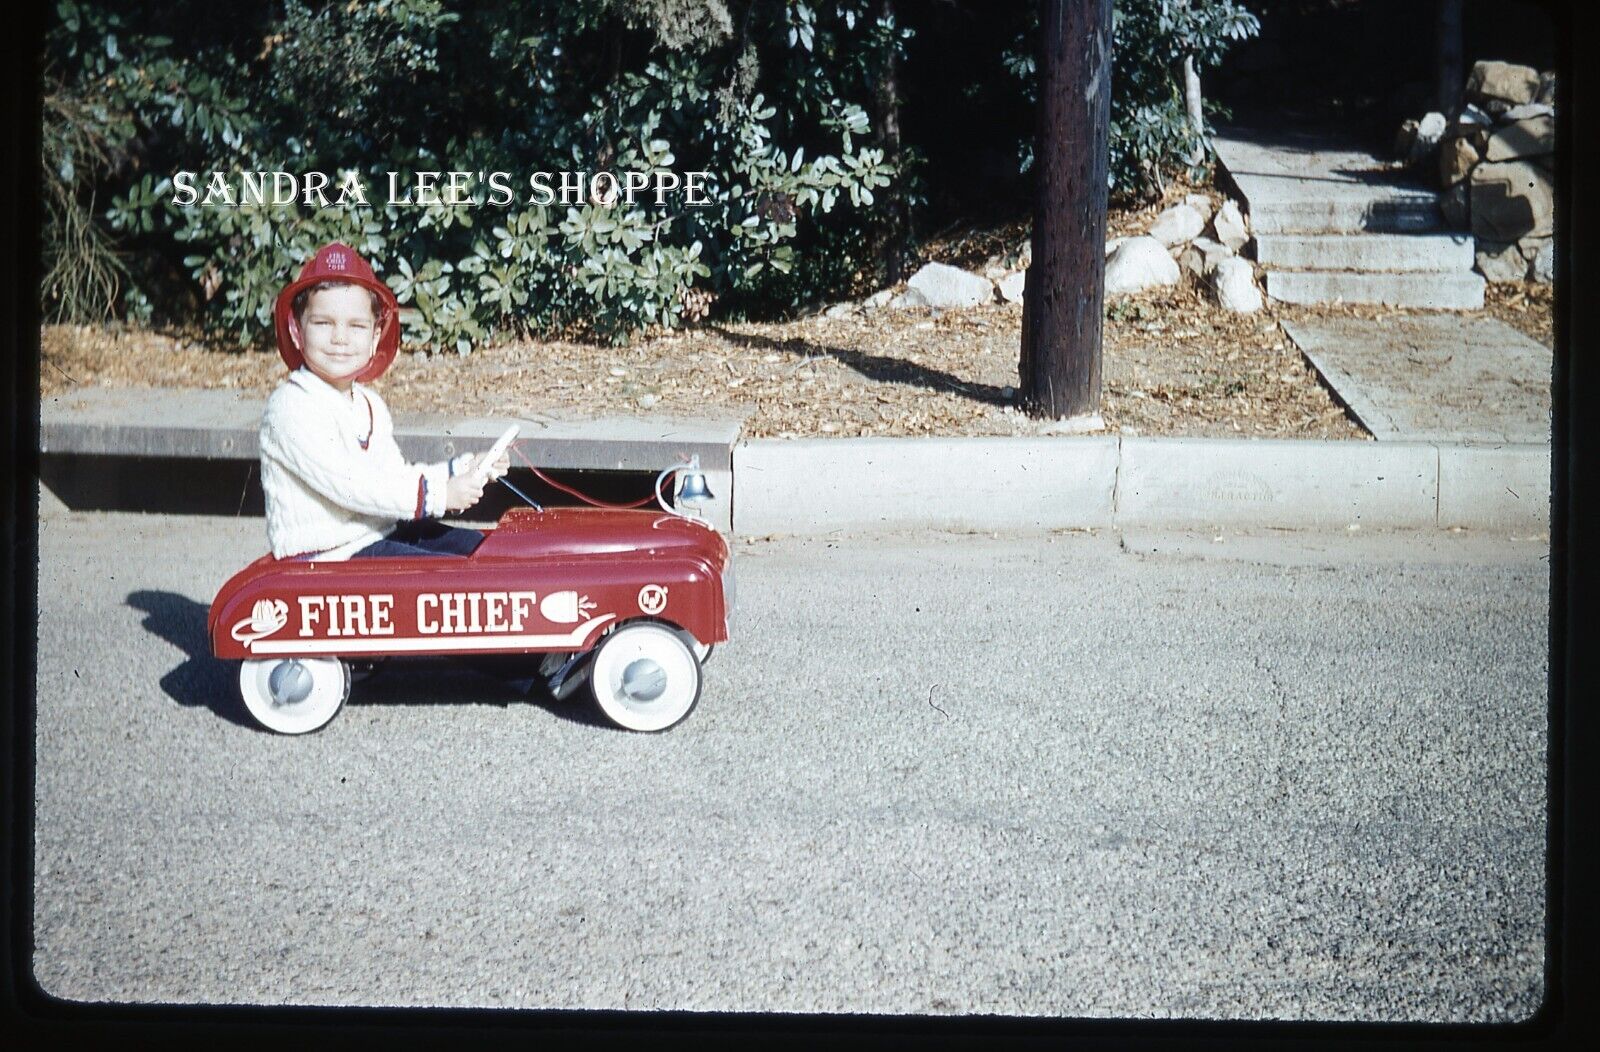 #776 Slide 1959 Smiling Boy Riding Red Fire Chief Pedal Toy Car Fireman Helmet